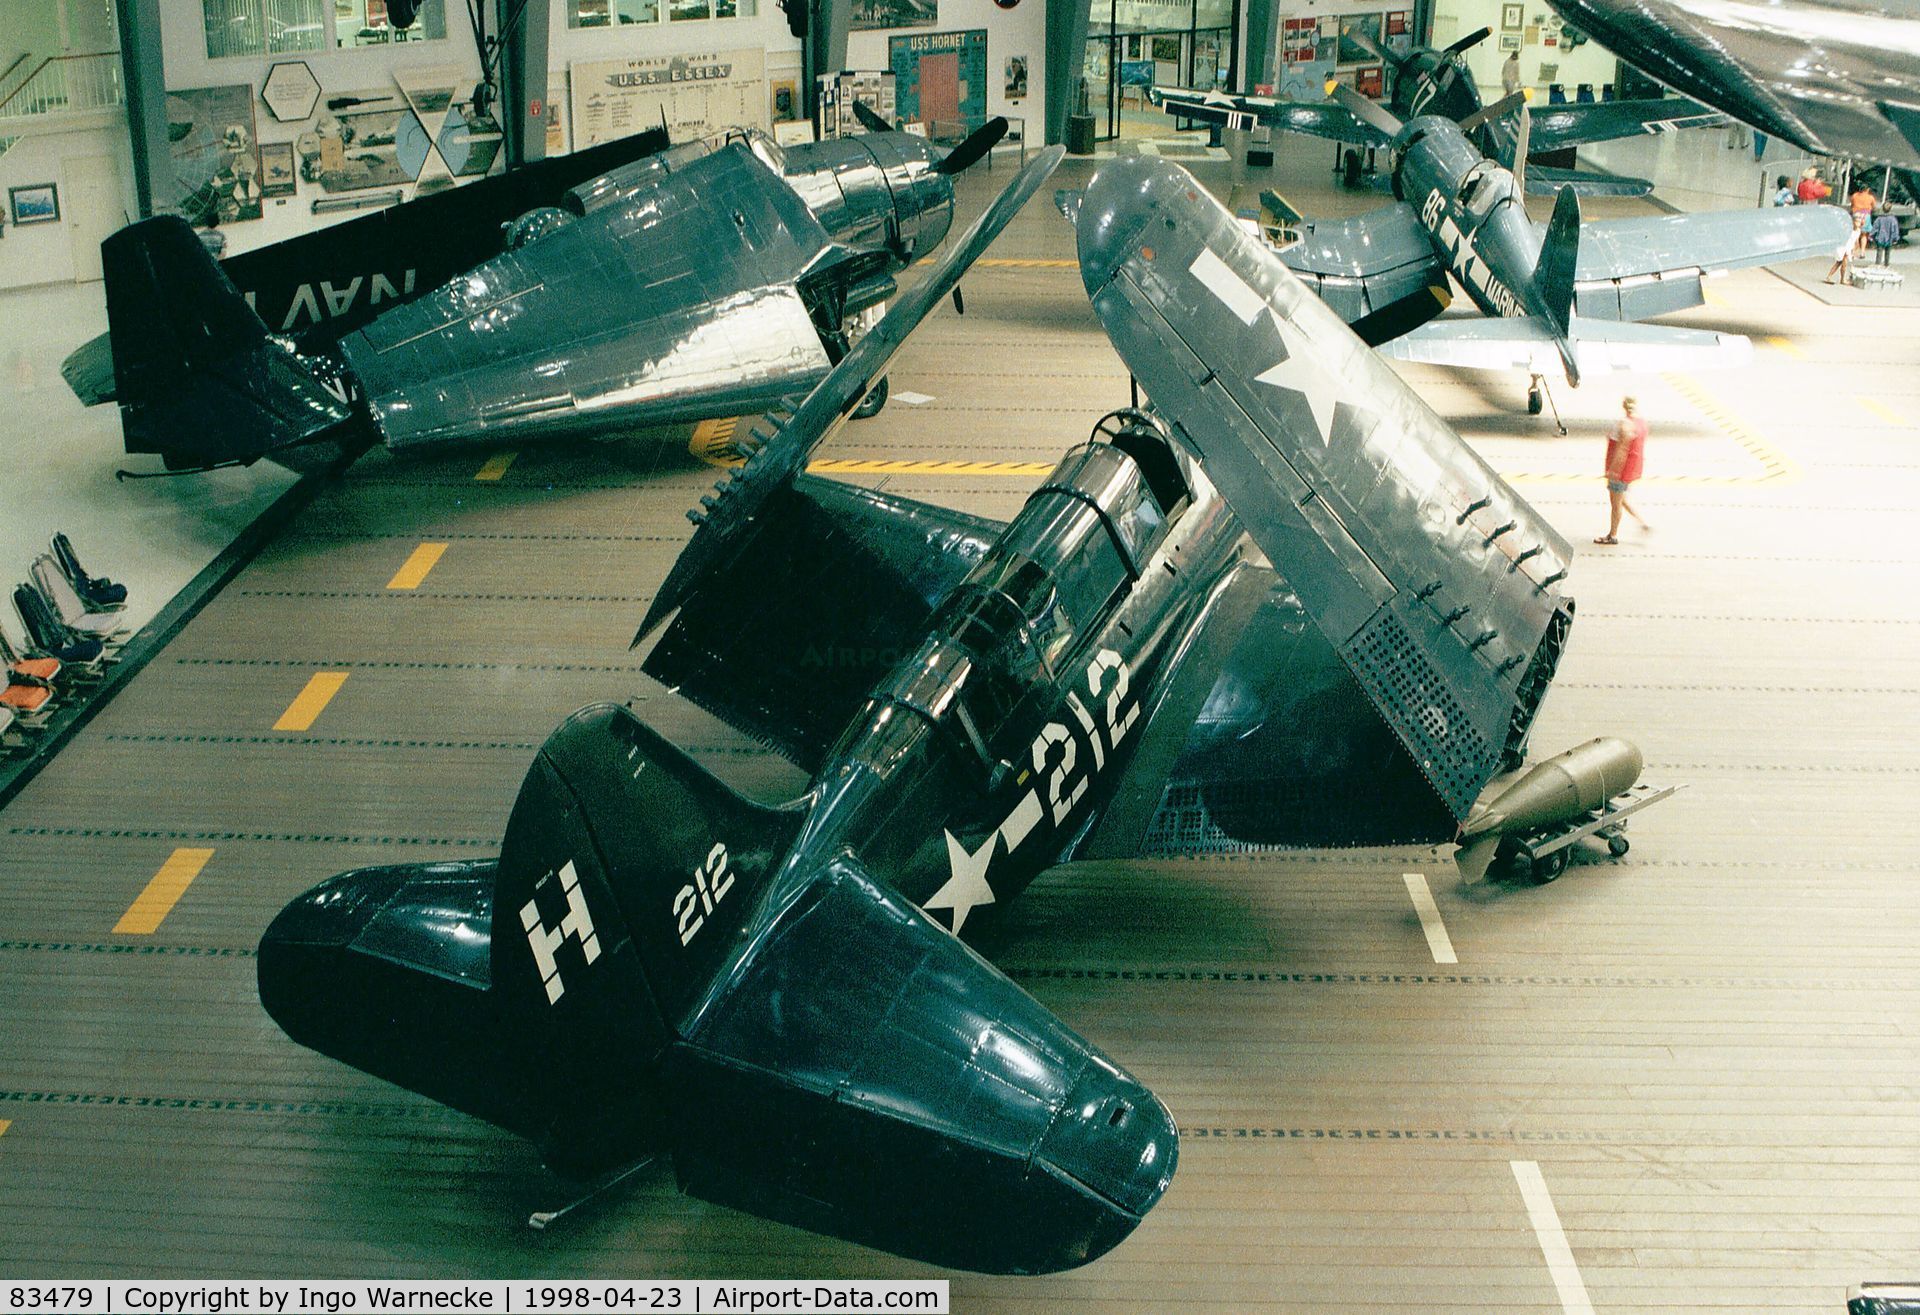 83479, Curtiss SB2C-5 Helldiver C/N Not found 83479, Curtiss SB2C-5 Helldiver at the Museum of Naval Aviation, Pensacola FL